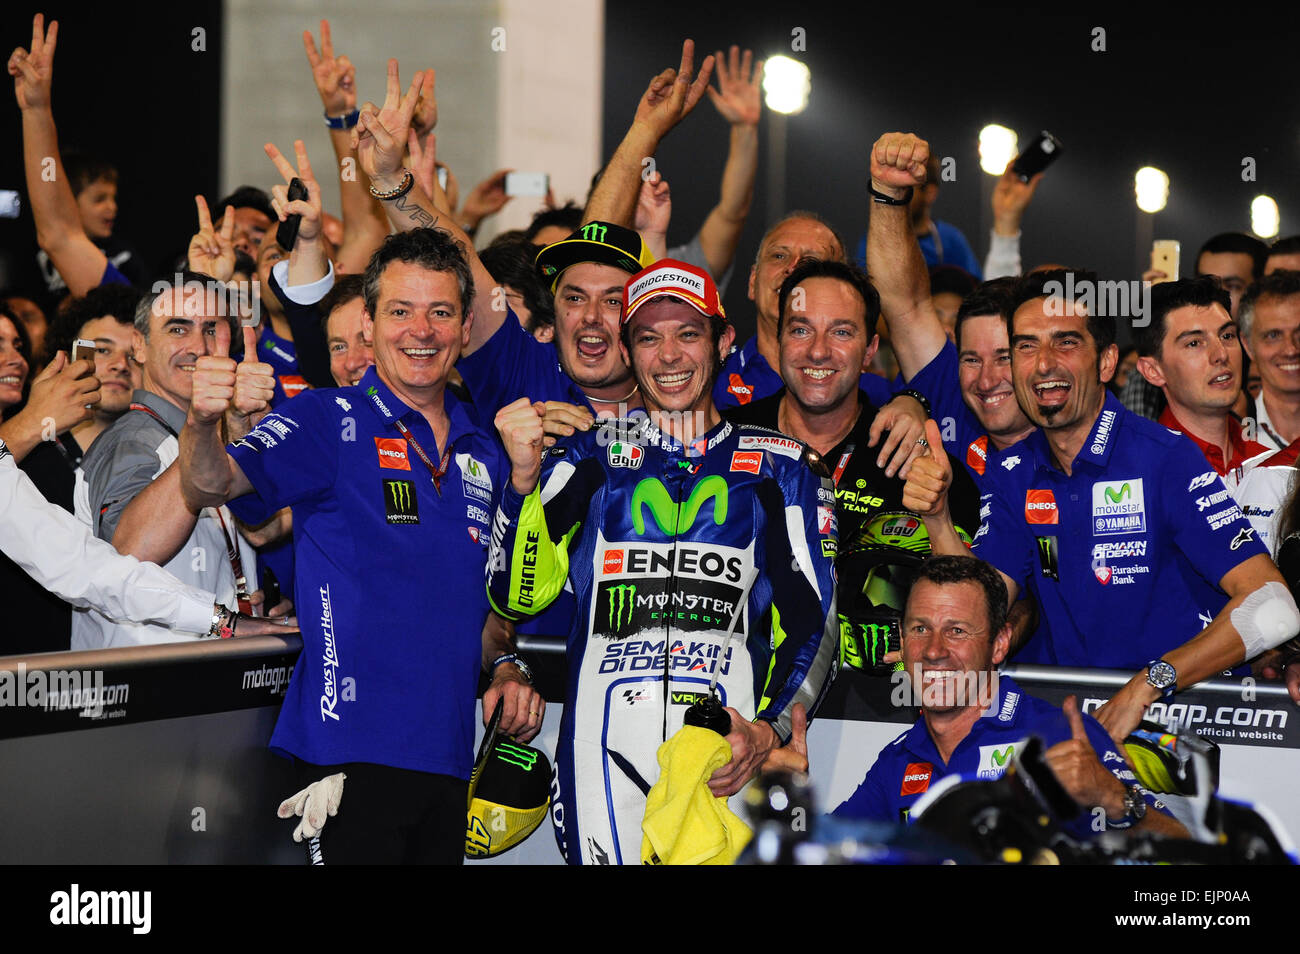 Losail, Doha, Qatar. 29th March, 2015. Valentino Rossi (Movistar Yamaha)  celebrate the first place at at Commercial Bank grand prix of Qatar Credit:  Gaetano Piazzolla/Alamy Live News Stock Photo - Alamy